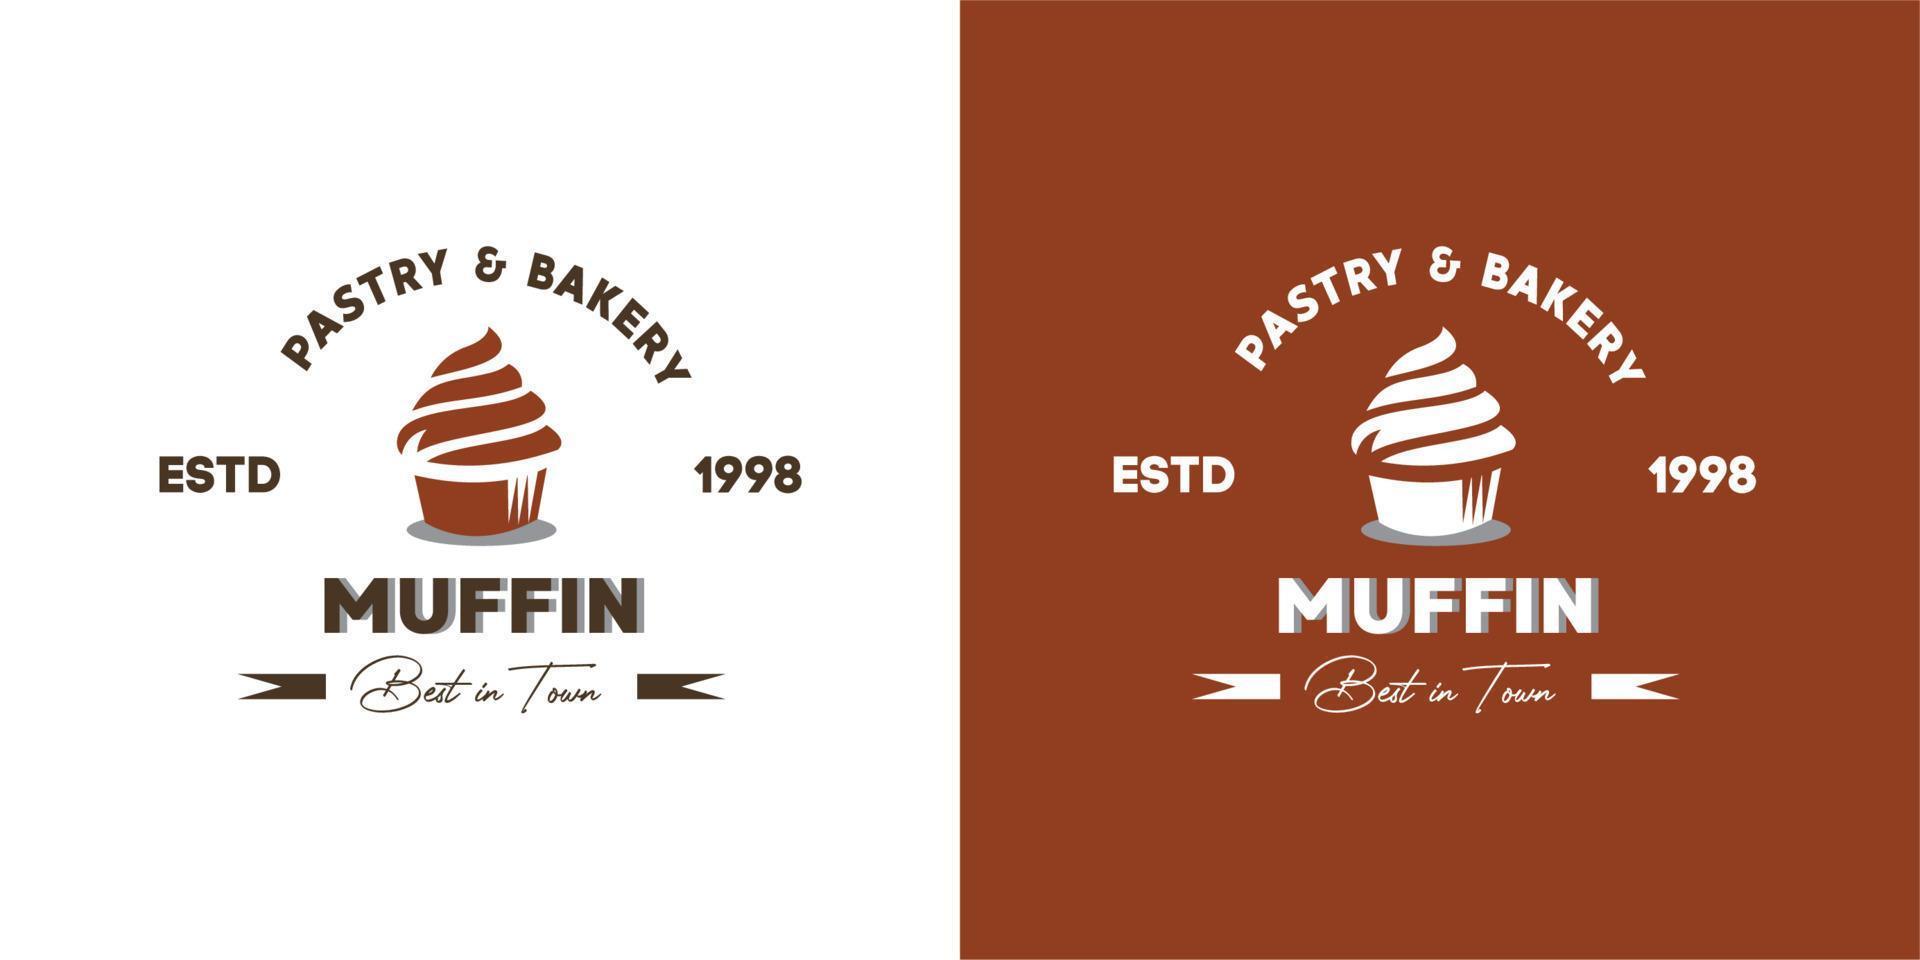 ILLUSTRATION VECTOR GRAPHIC OF brown crunchy curry puff from pastry and bakery shop premium quality GOOD FOR muffin vintage logo product from bakery and pastry shop tasty and savoury